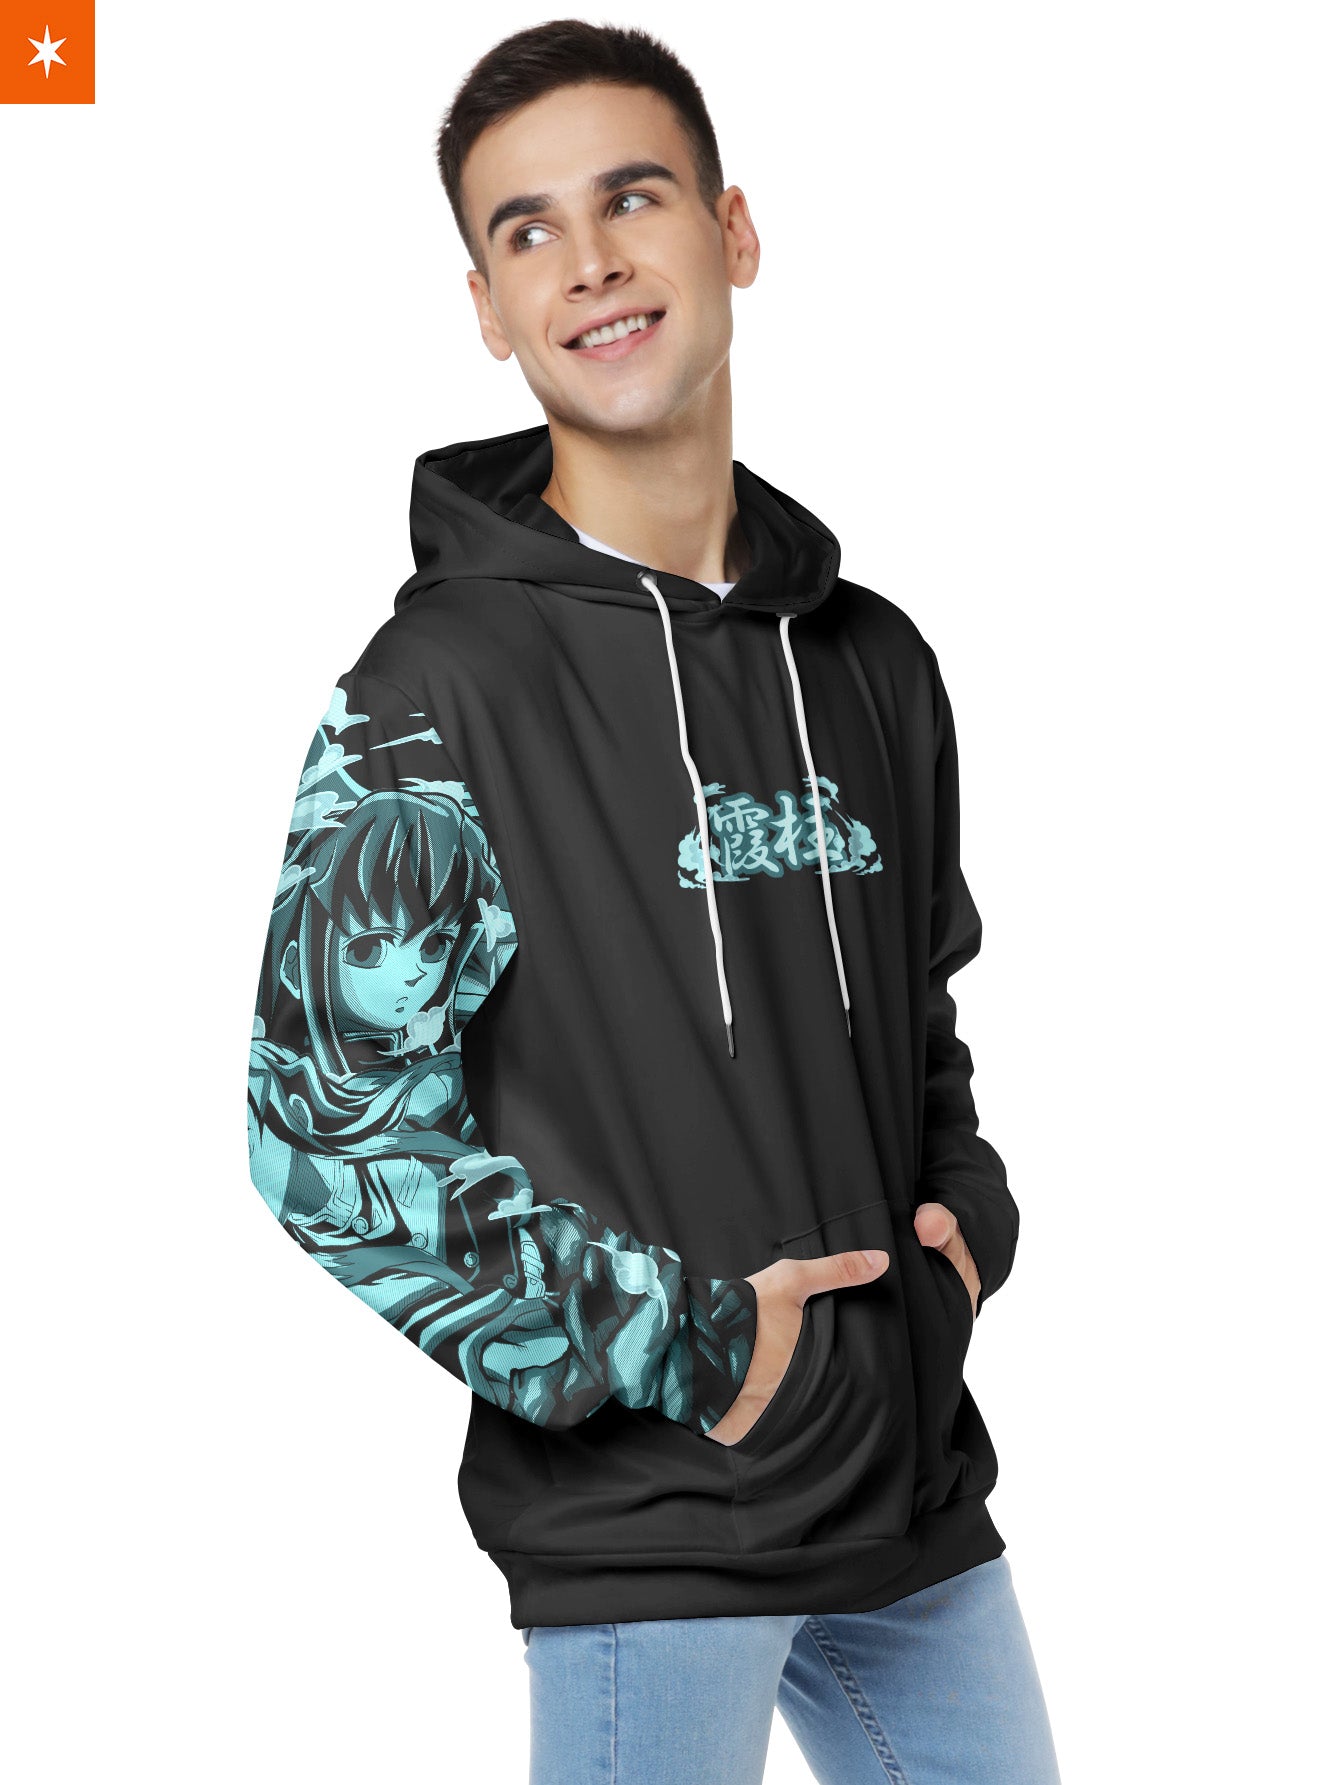 Child Prodigy Unisex Pullover Hoodie